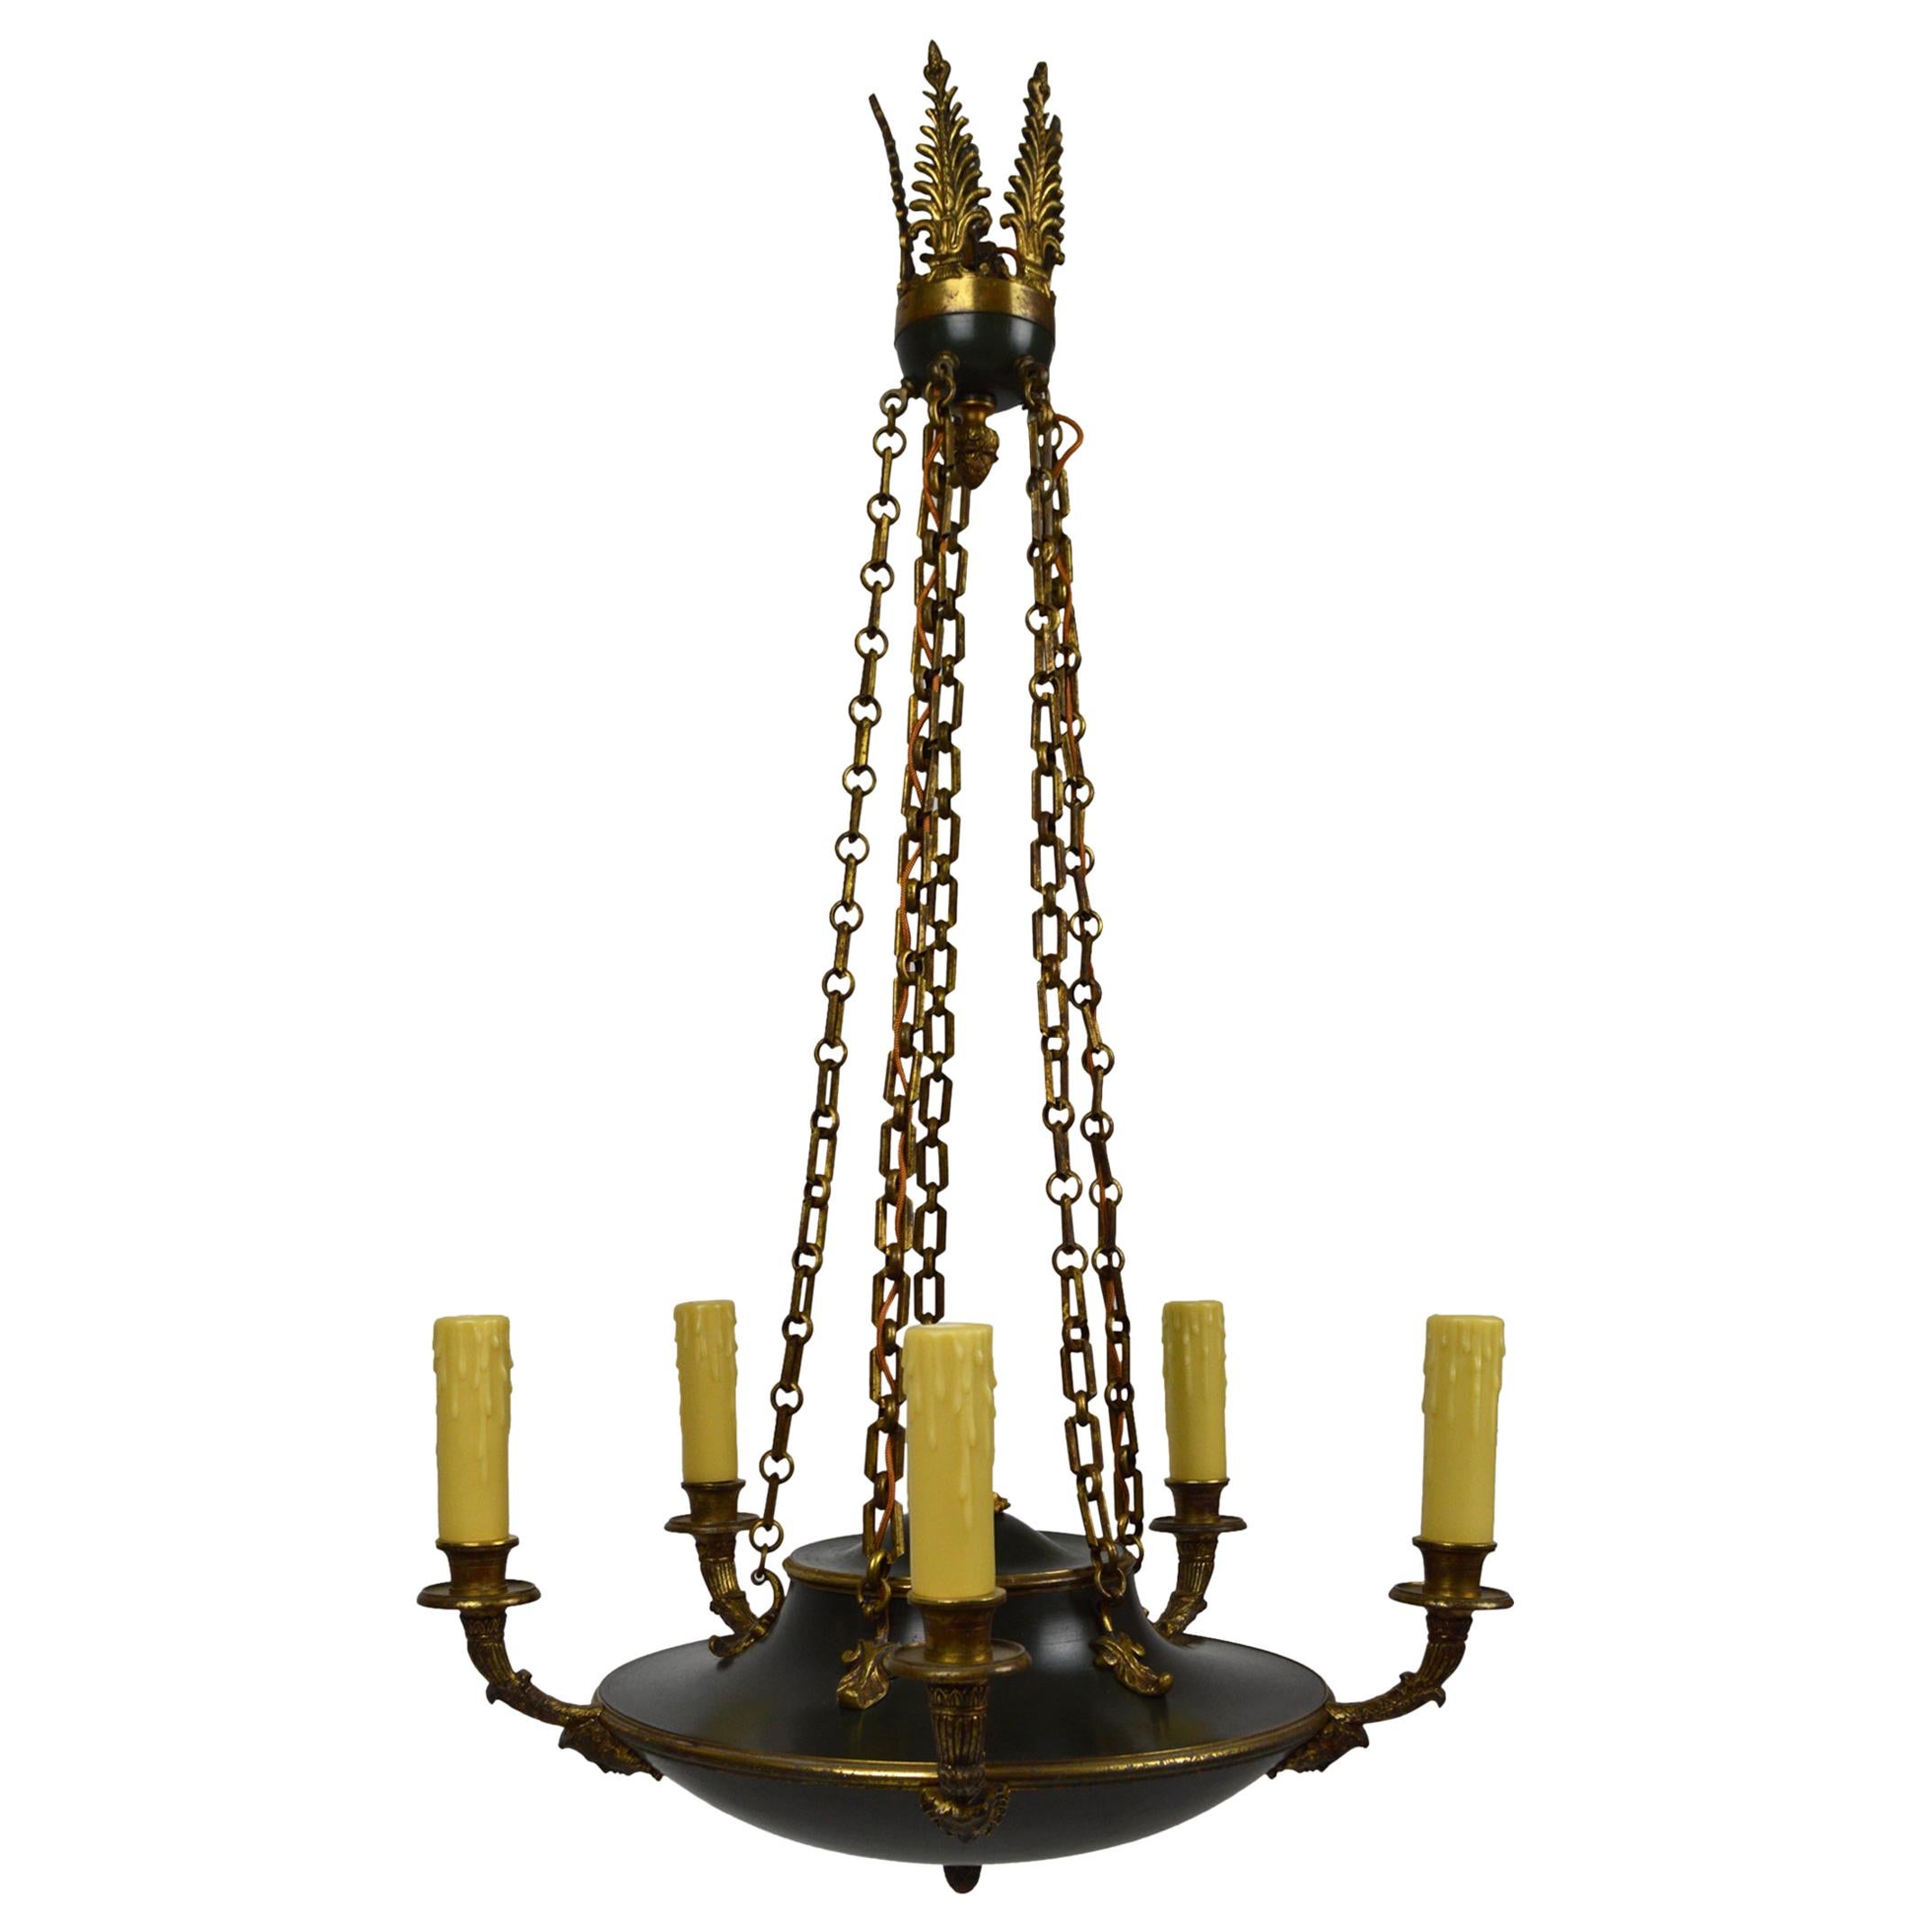 Antique French Empire Chandelier in Patinated Bronze, 19th Century For Sale